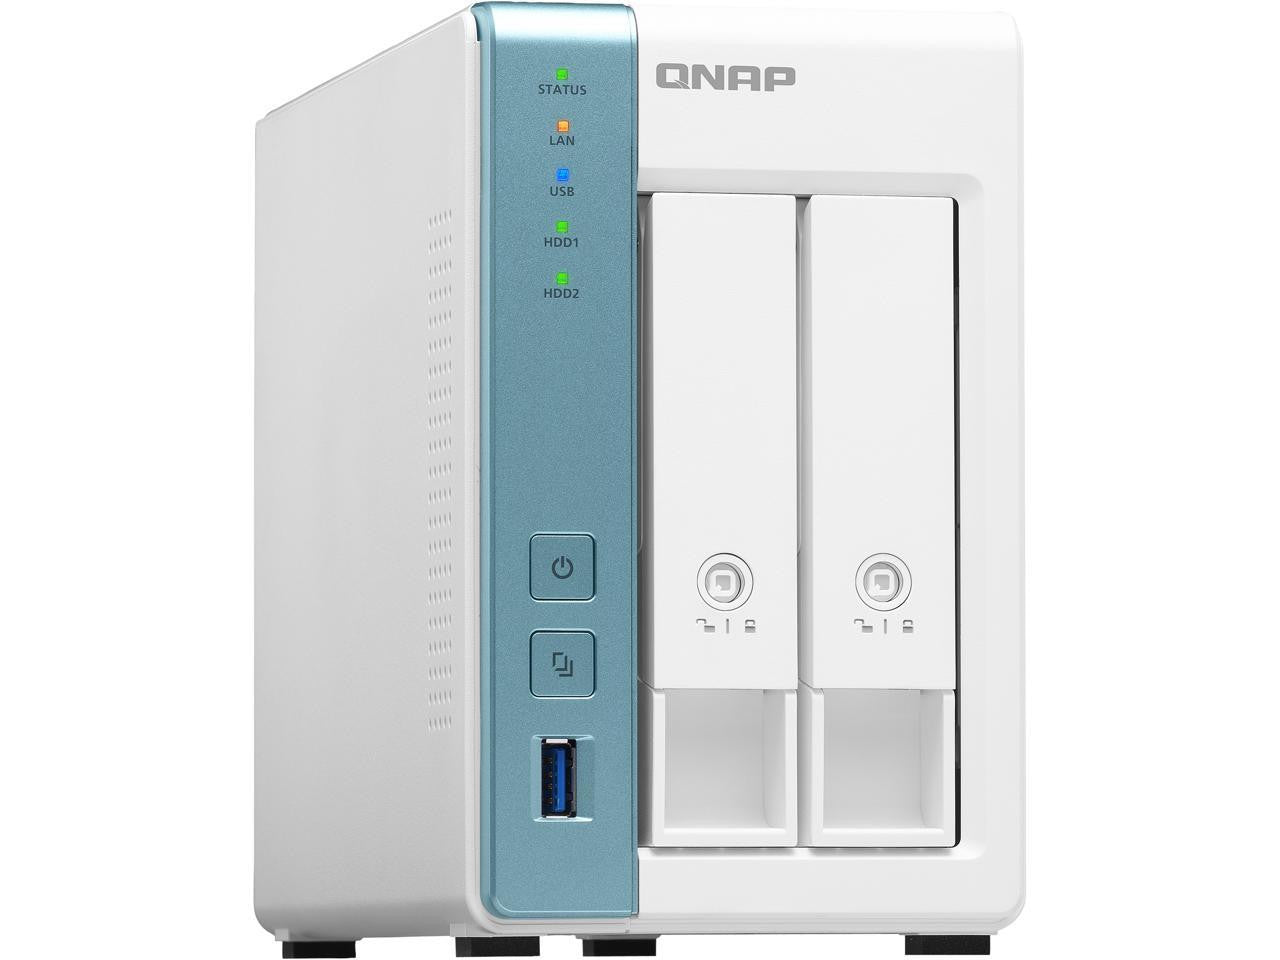 QNAP TS-231K 2-Bay Home NAS with 20TB (2 x 10TB) of Seagate Ironwolf NAS Drives Fully Assembled and Tested